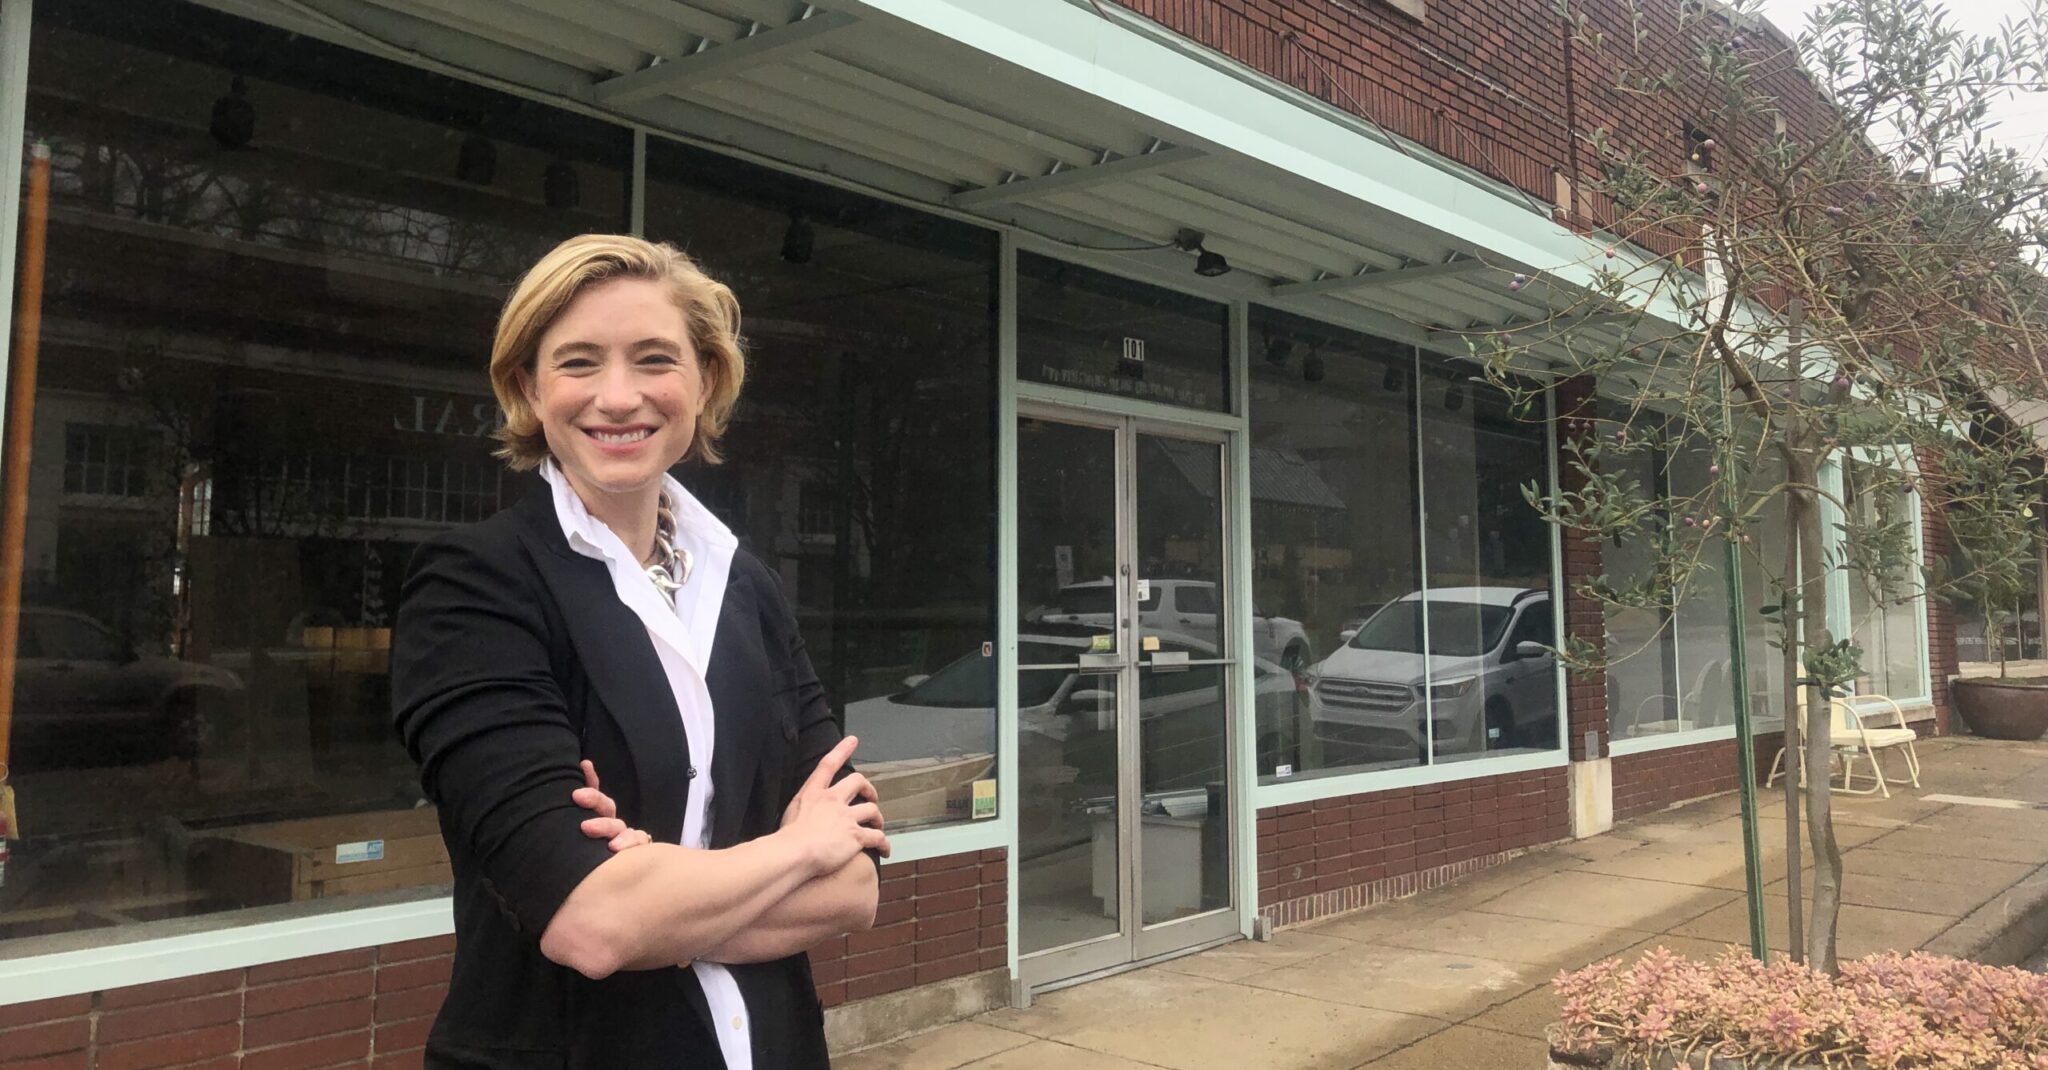 MK Quinlan to open namesake boutique at former Zoe’s in Forest Park space